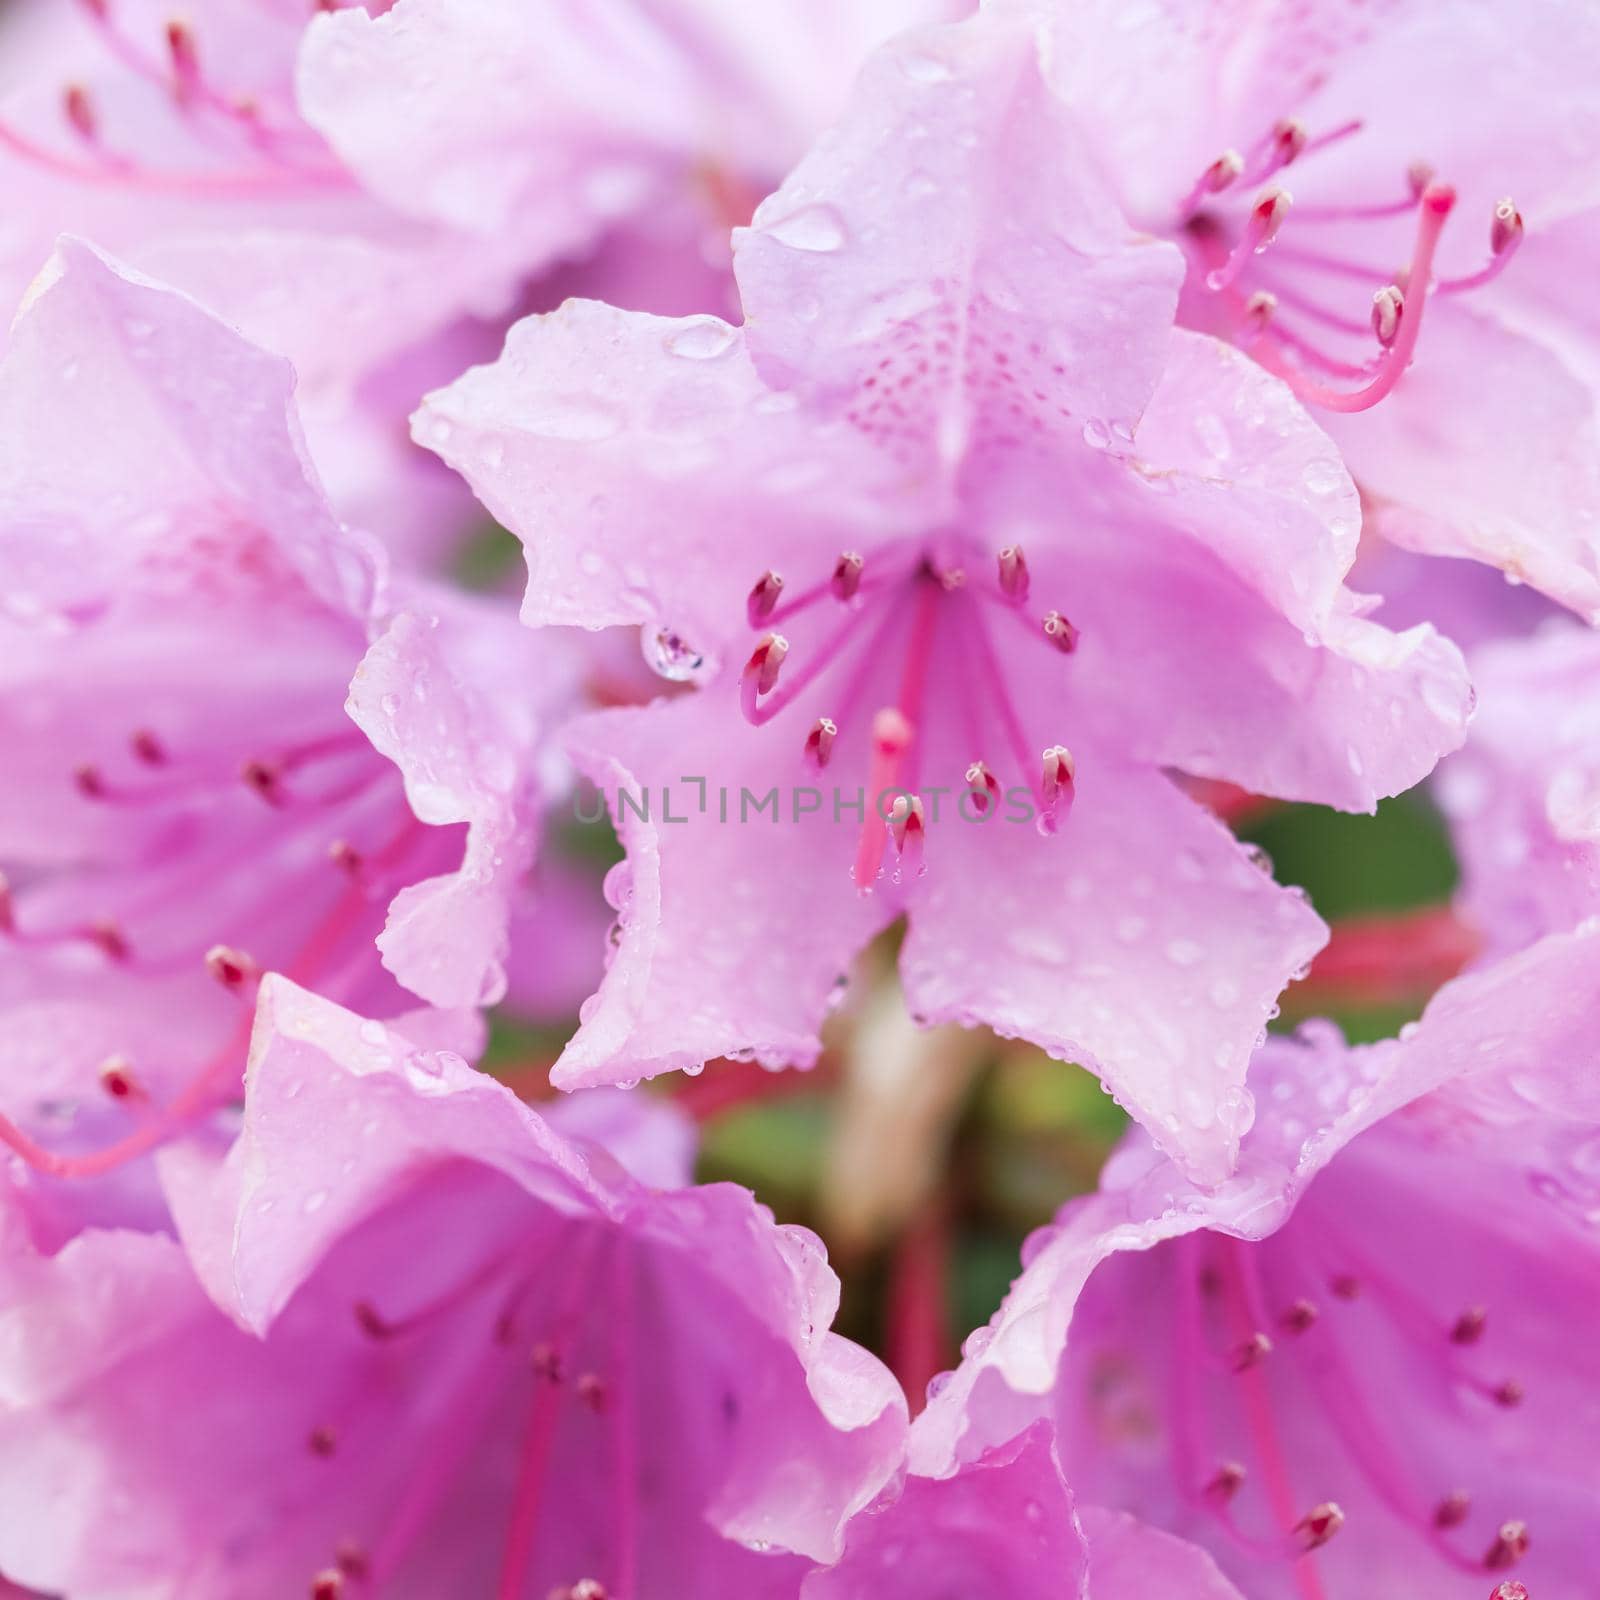 Blooming pink rhododendron flower in spring. Gardening concept. Flower background by Olayola